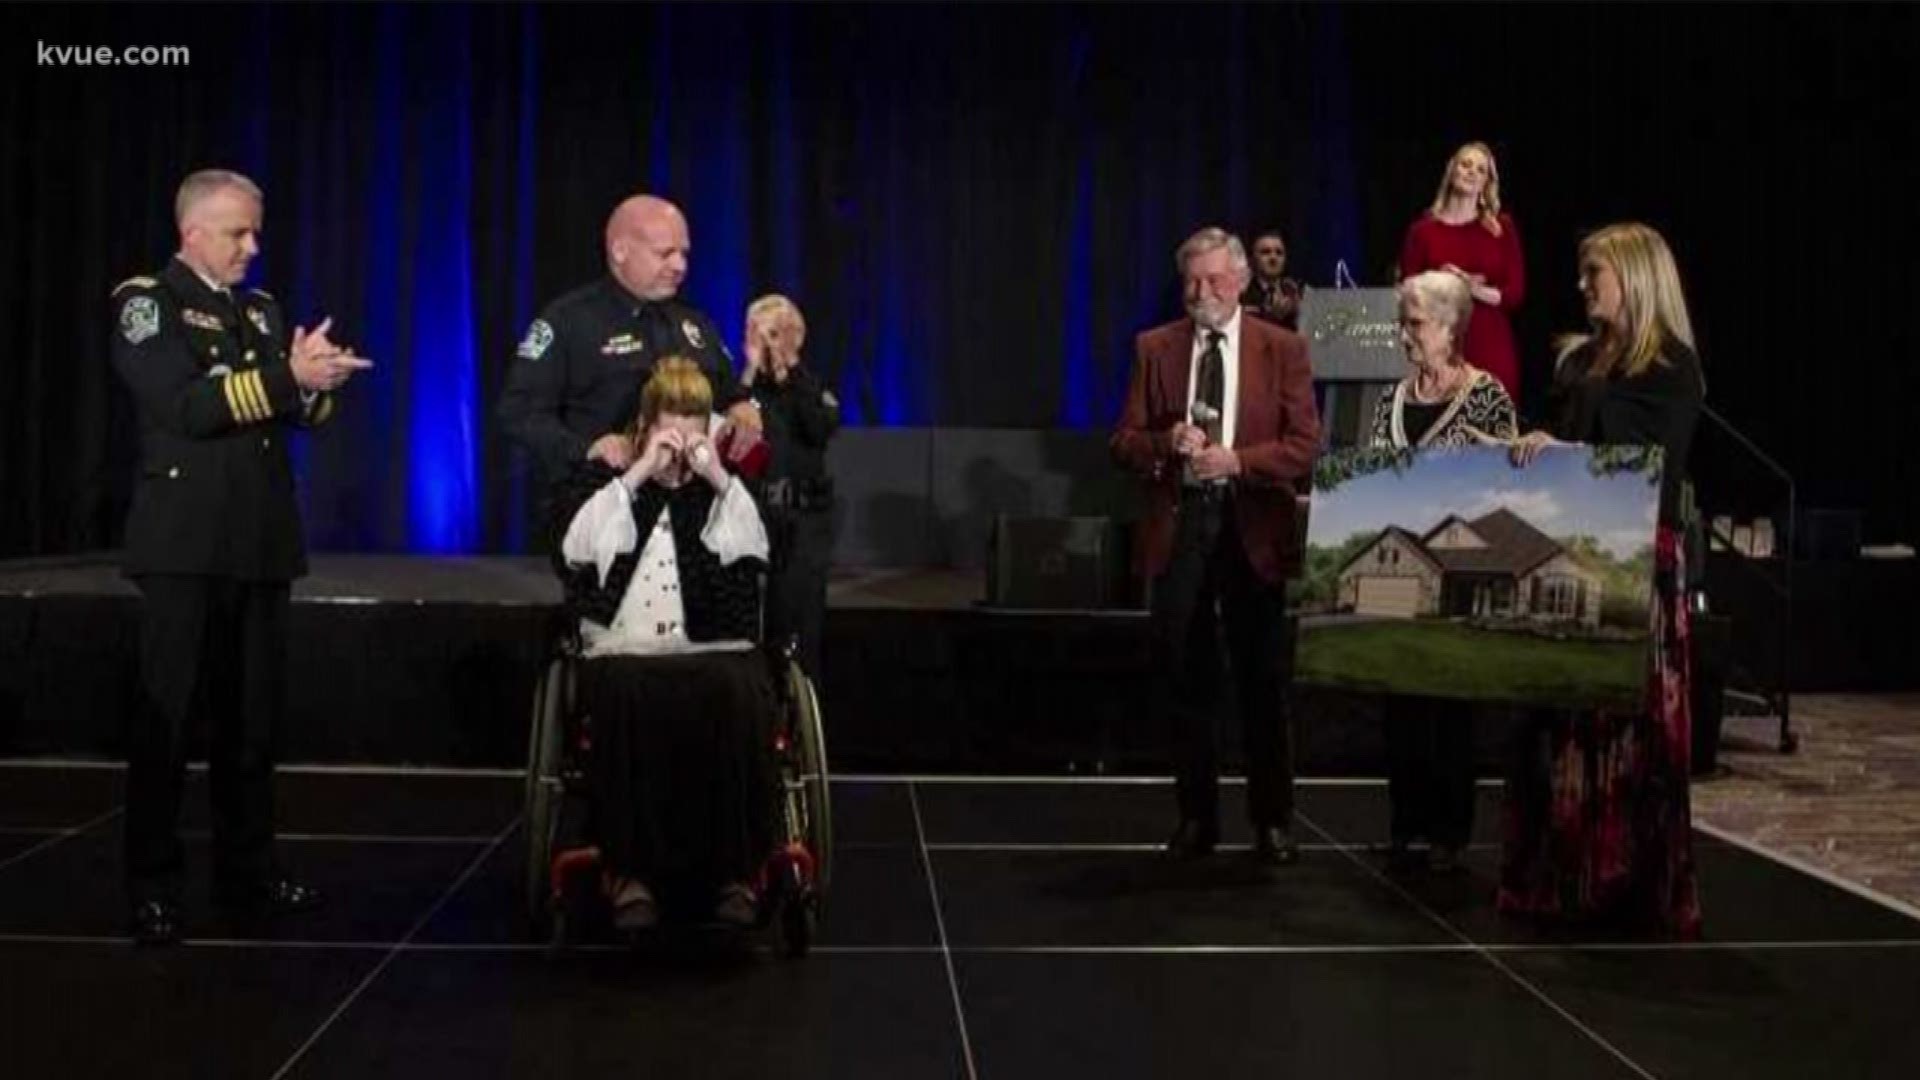 Officer Barrett was gifted a mortgage-free home at the "Stars of Distinction Awards Gala."